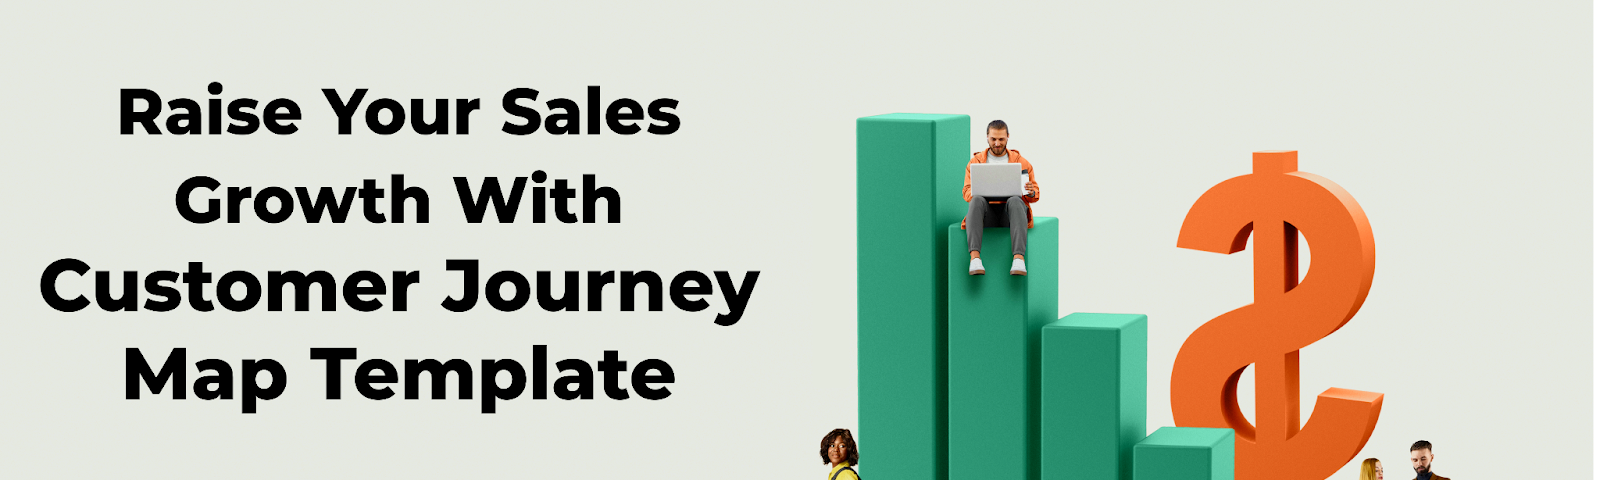 Banner image showing how people increased their sales using customer journey maps